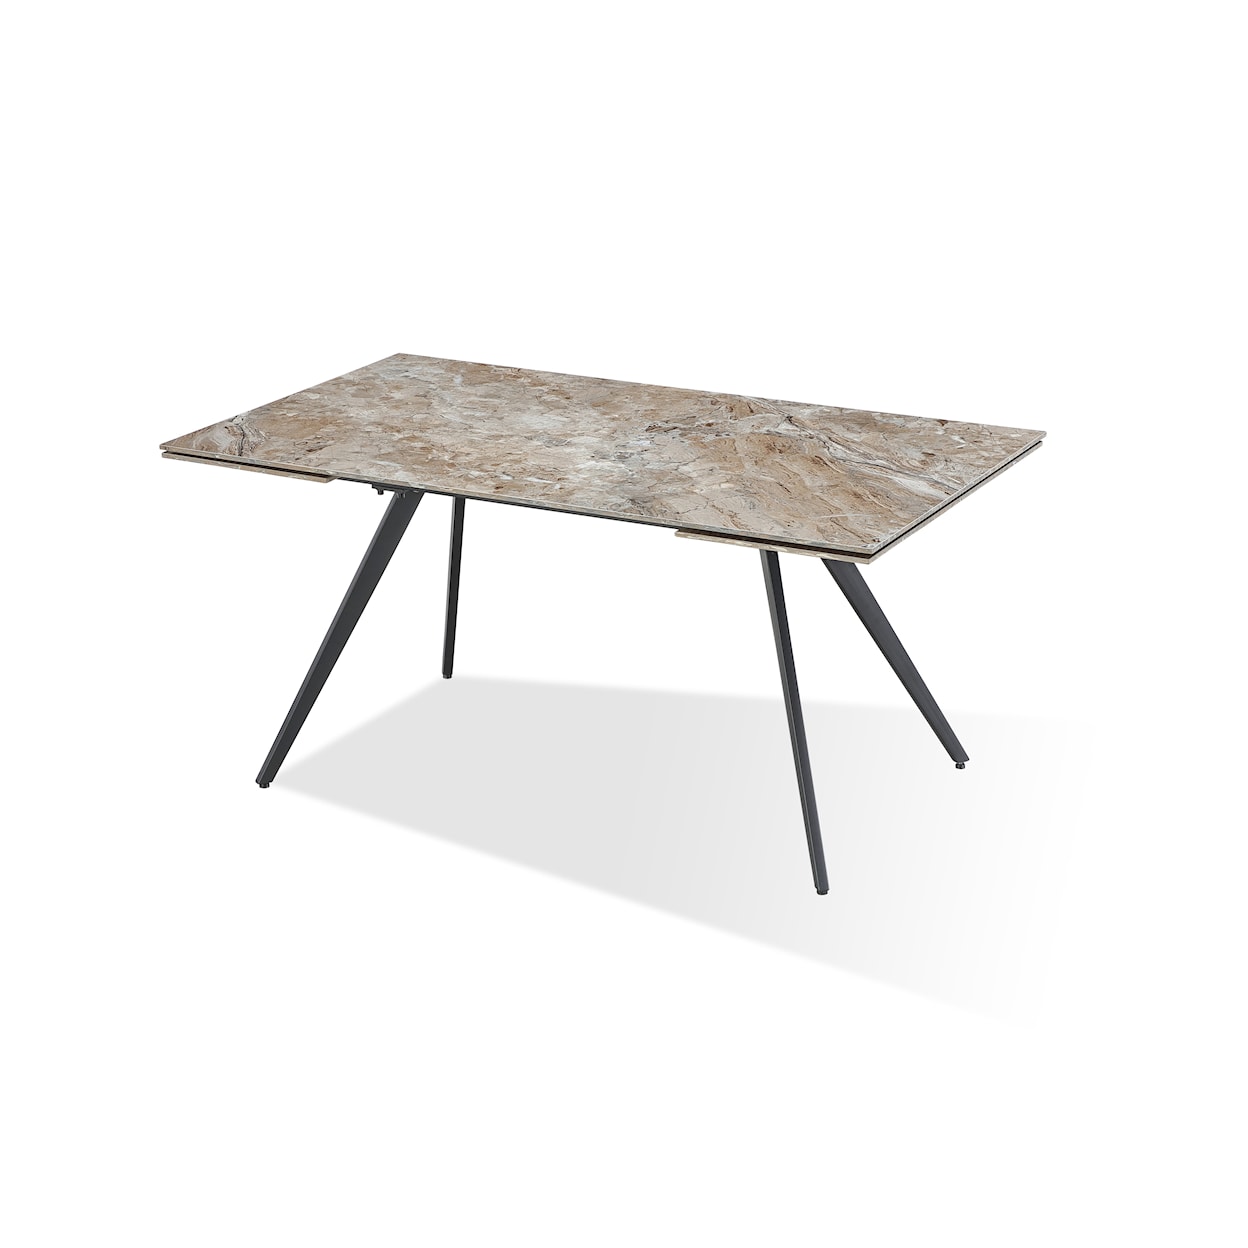 Modus International Lucia Double Ext Stone Top Metal Leg Dining Table